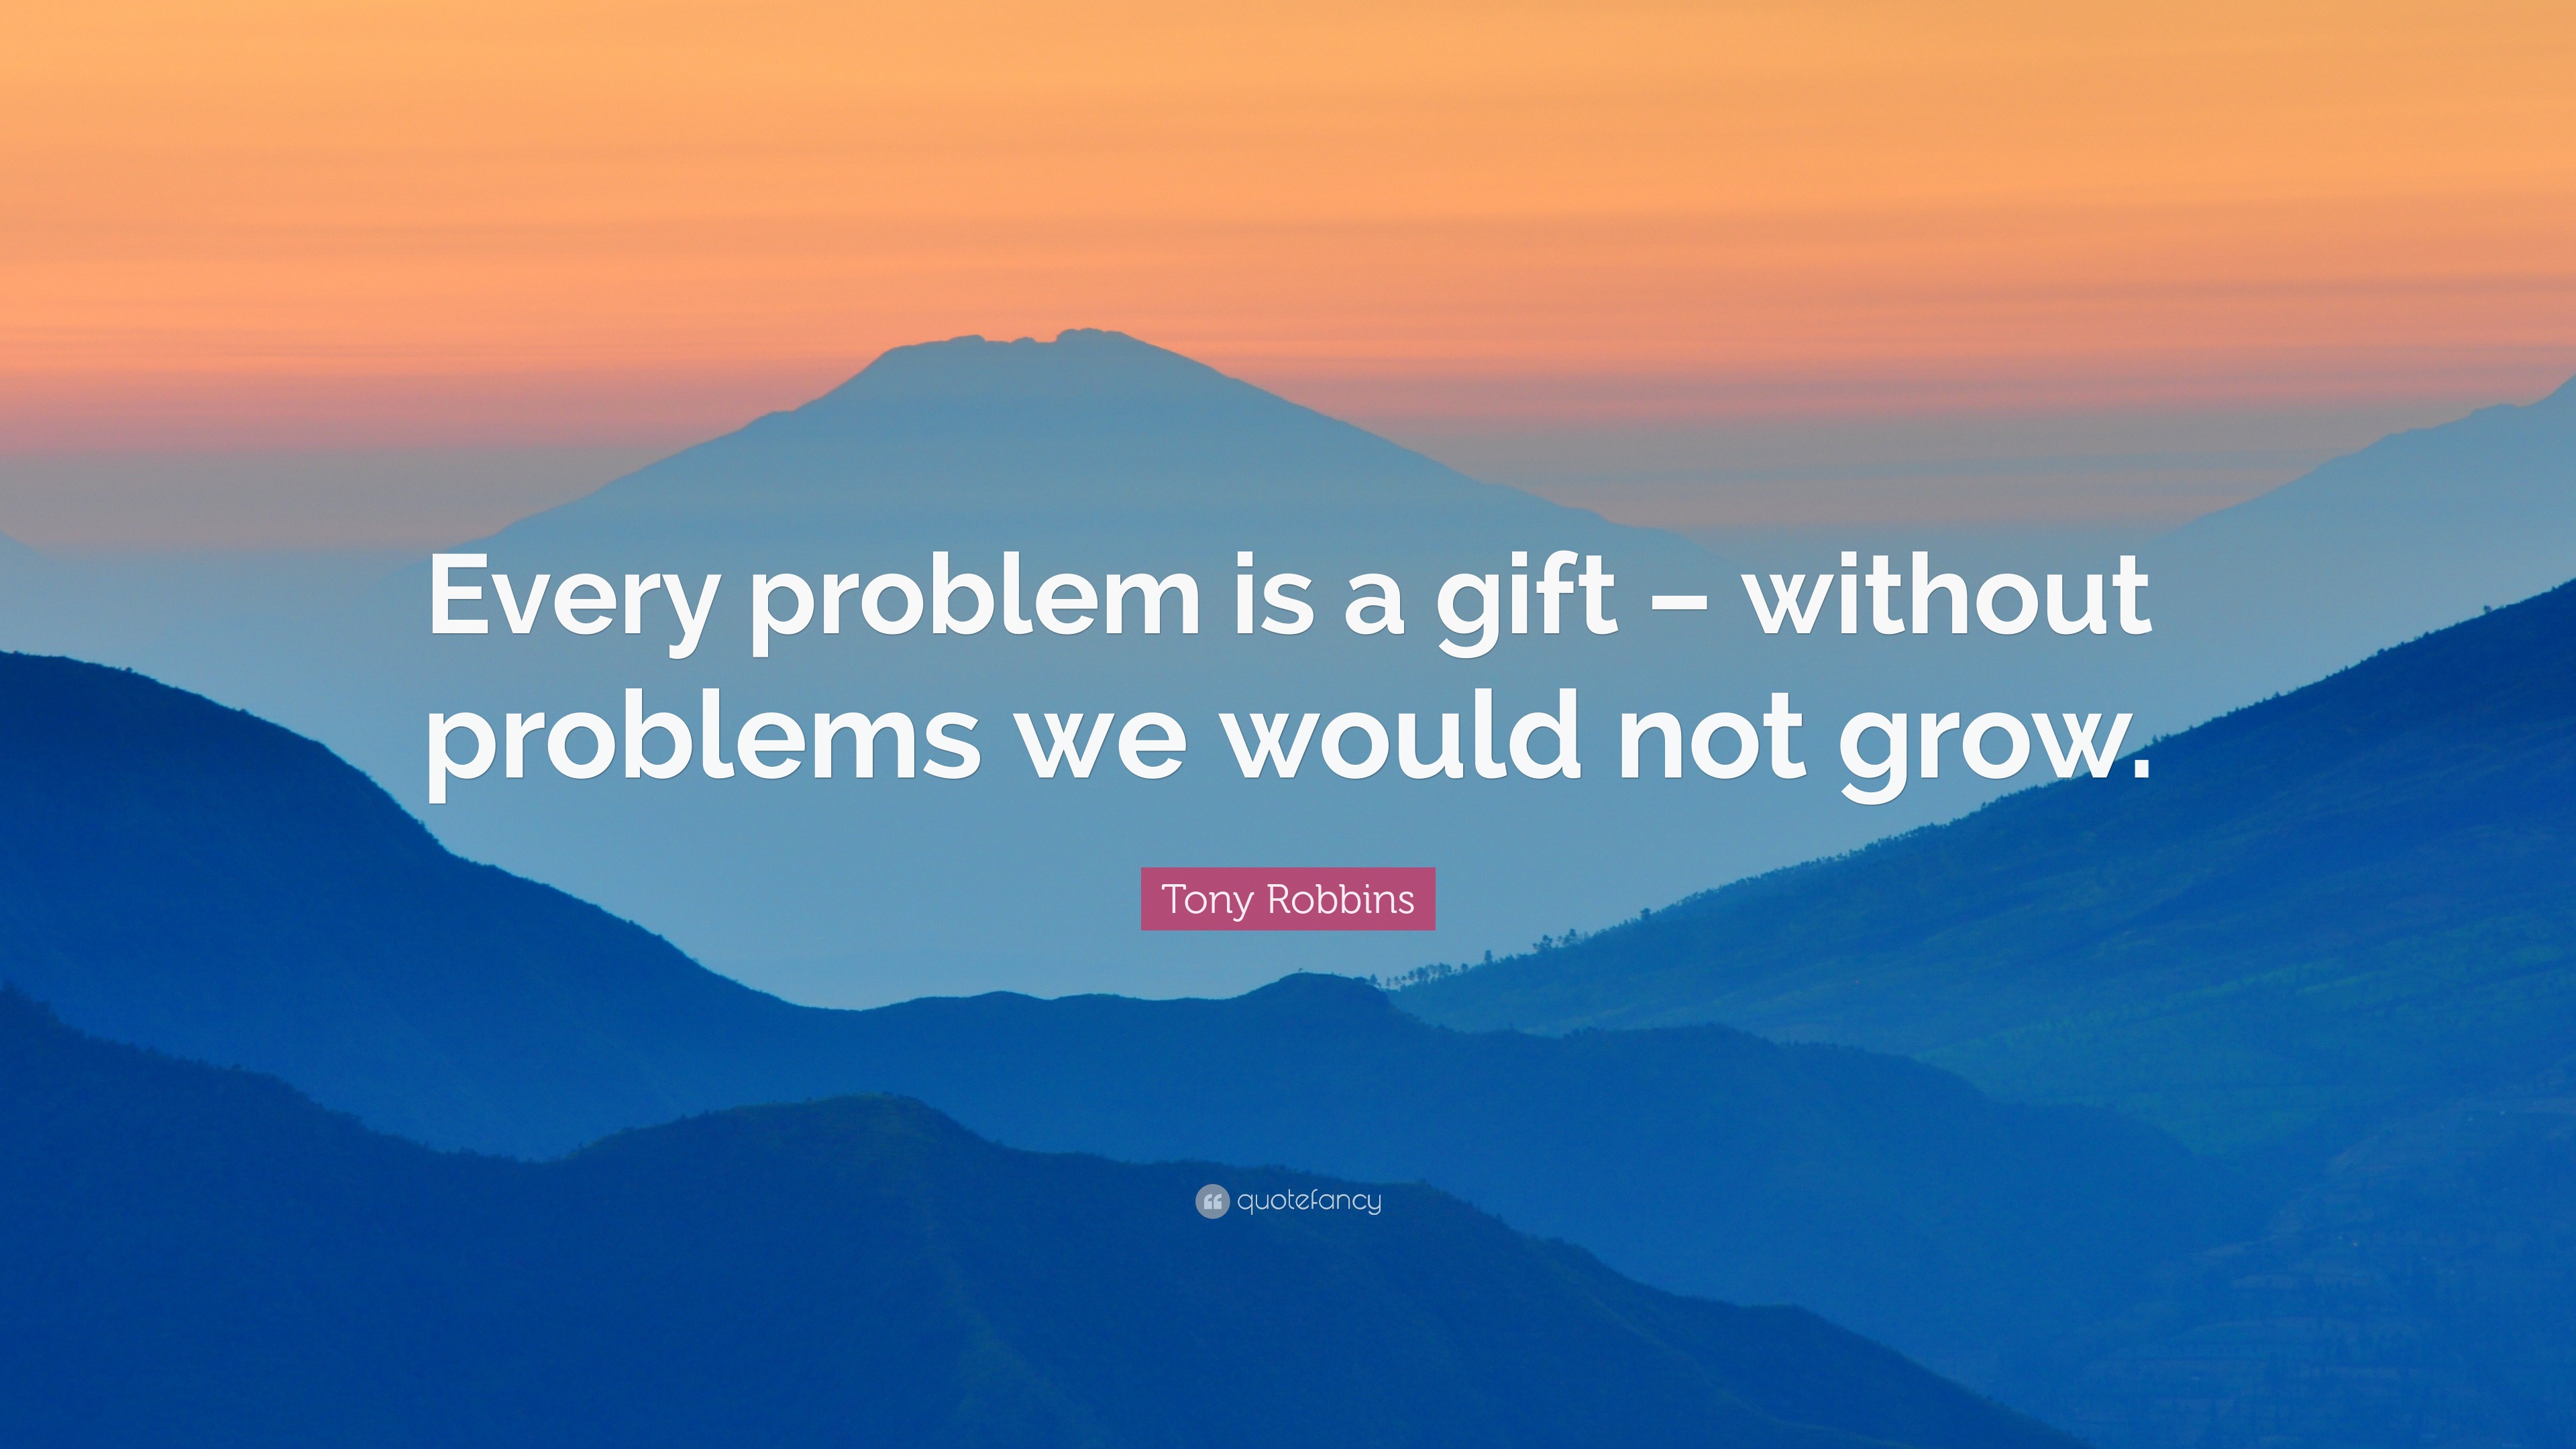 Tony Robbins Quote: “Every problem is a gift – without problems we